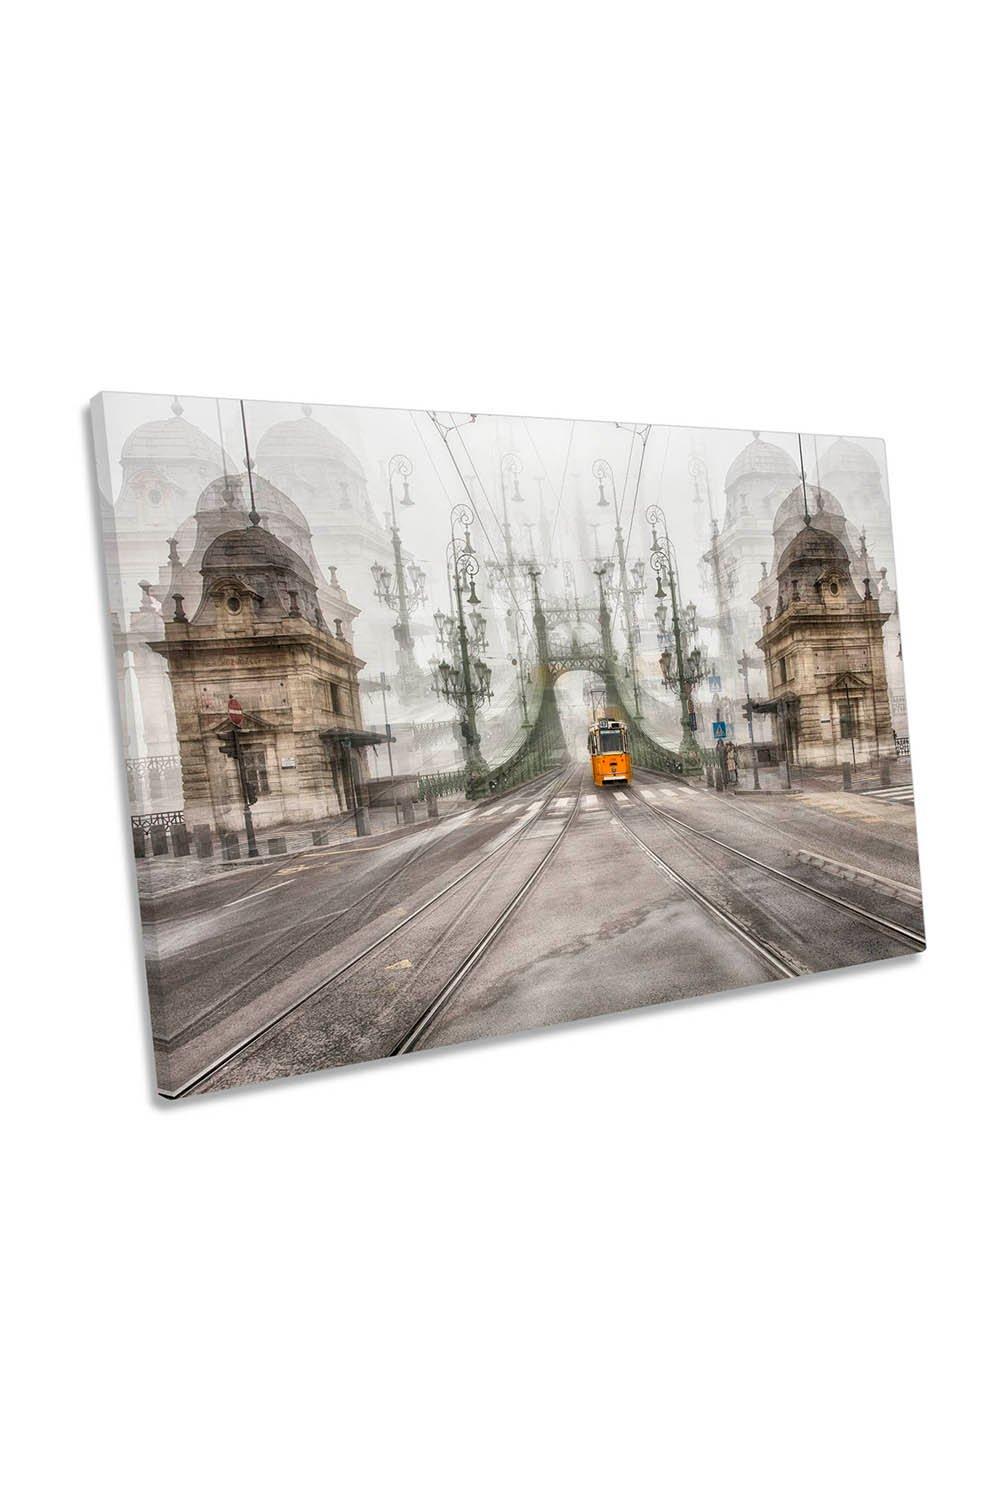 Yellow Tram Budapest City Canvas Wall Art Picture Print